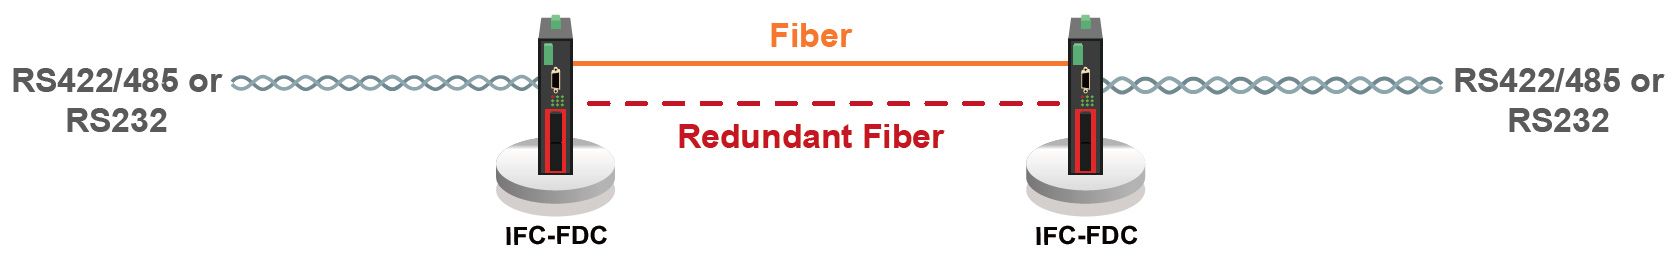 IFC-FDC Redundant Fiber Point to Point topology & application